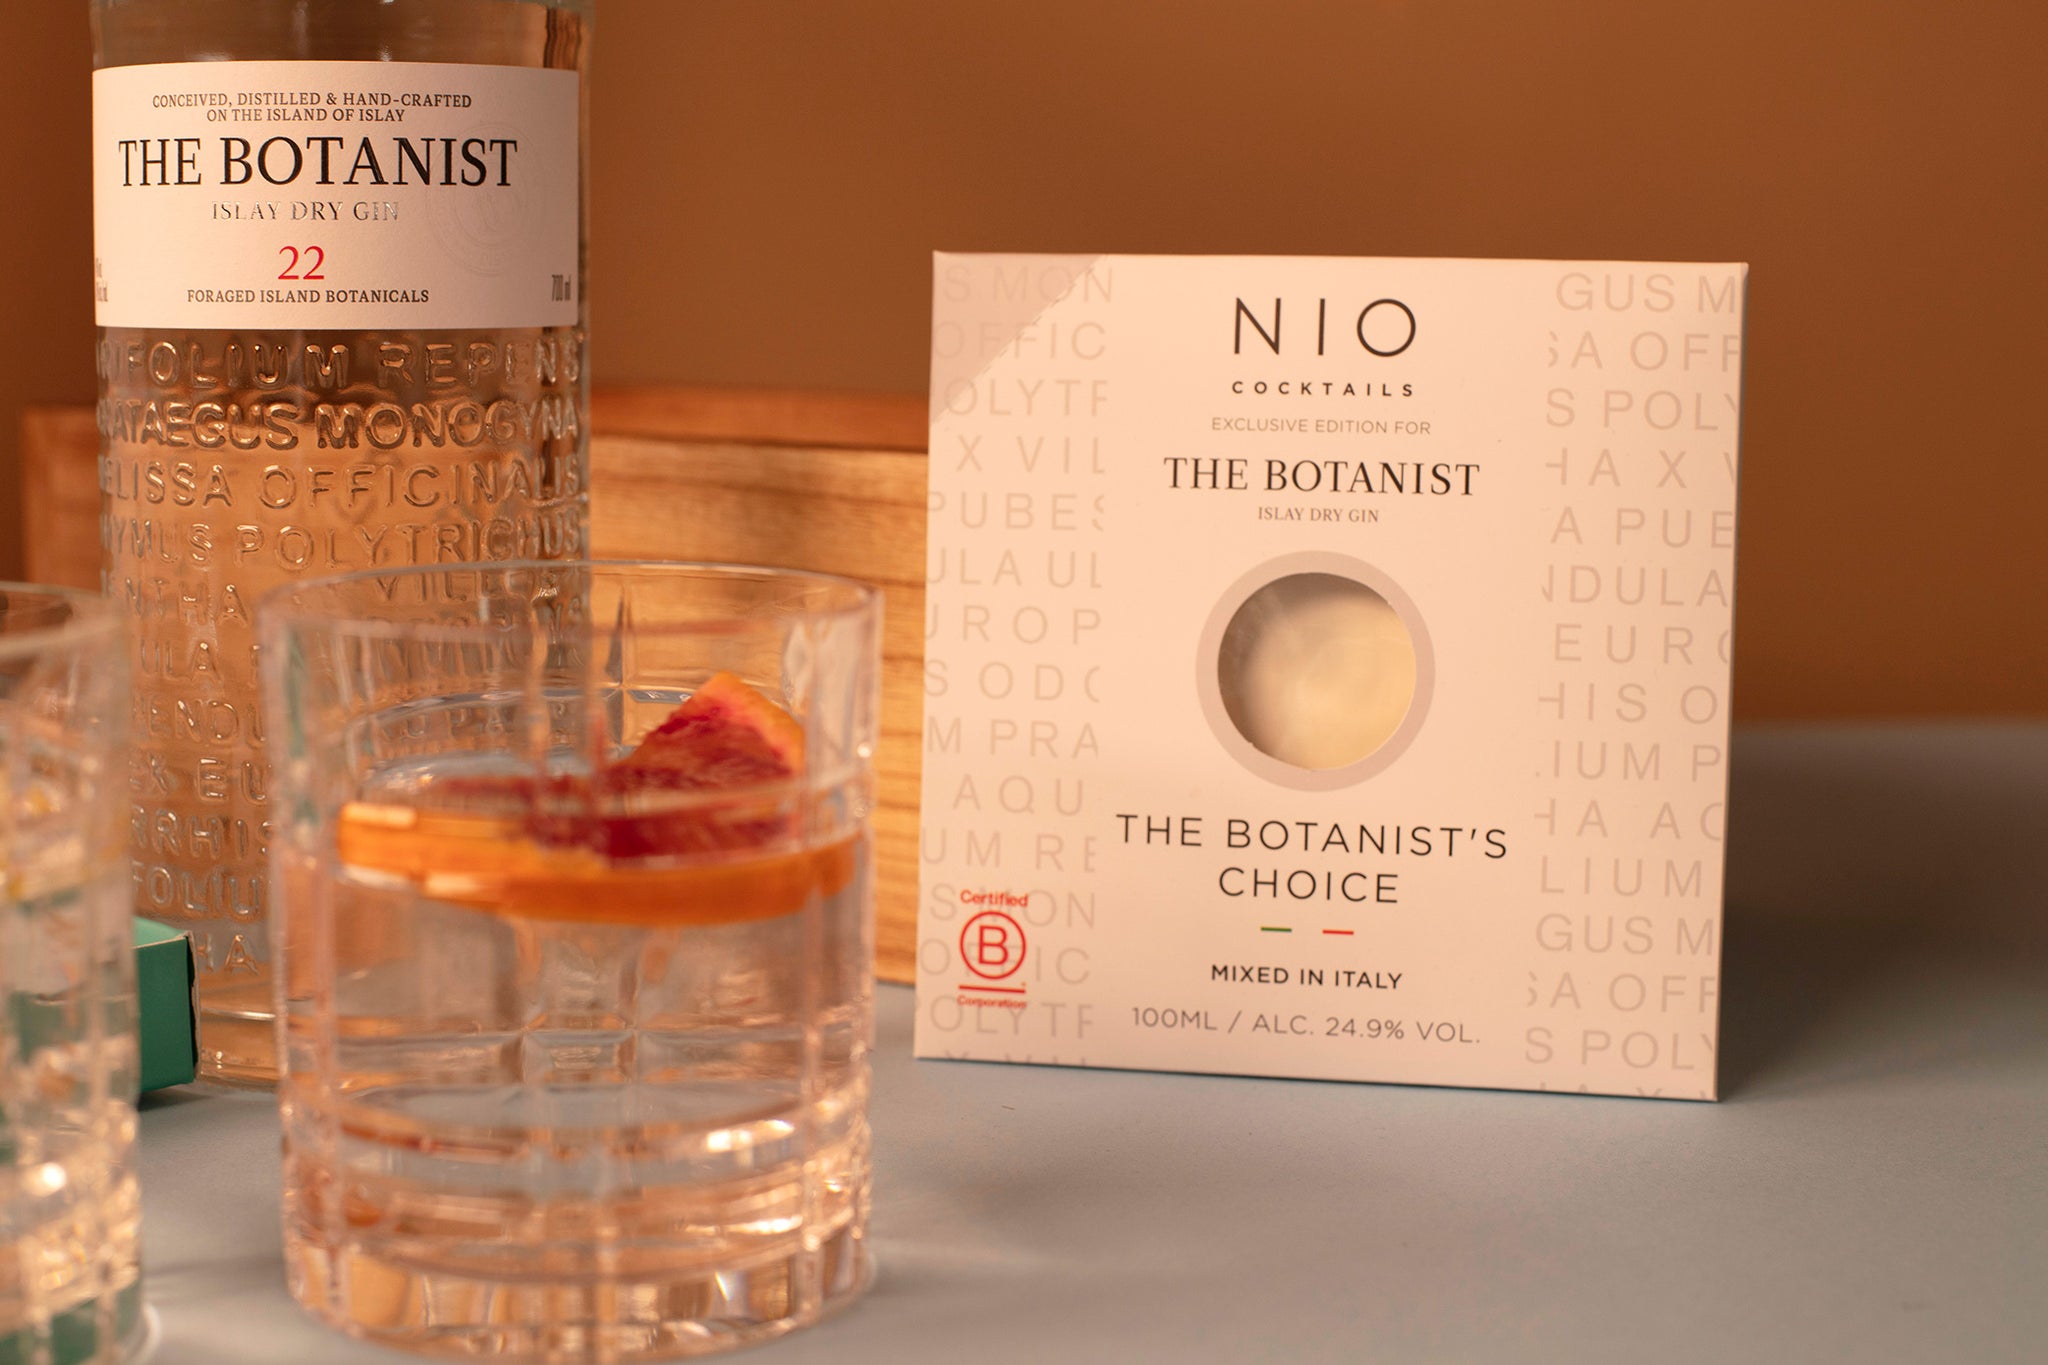 Bruichladdich and The Botanist Cocktail Box